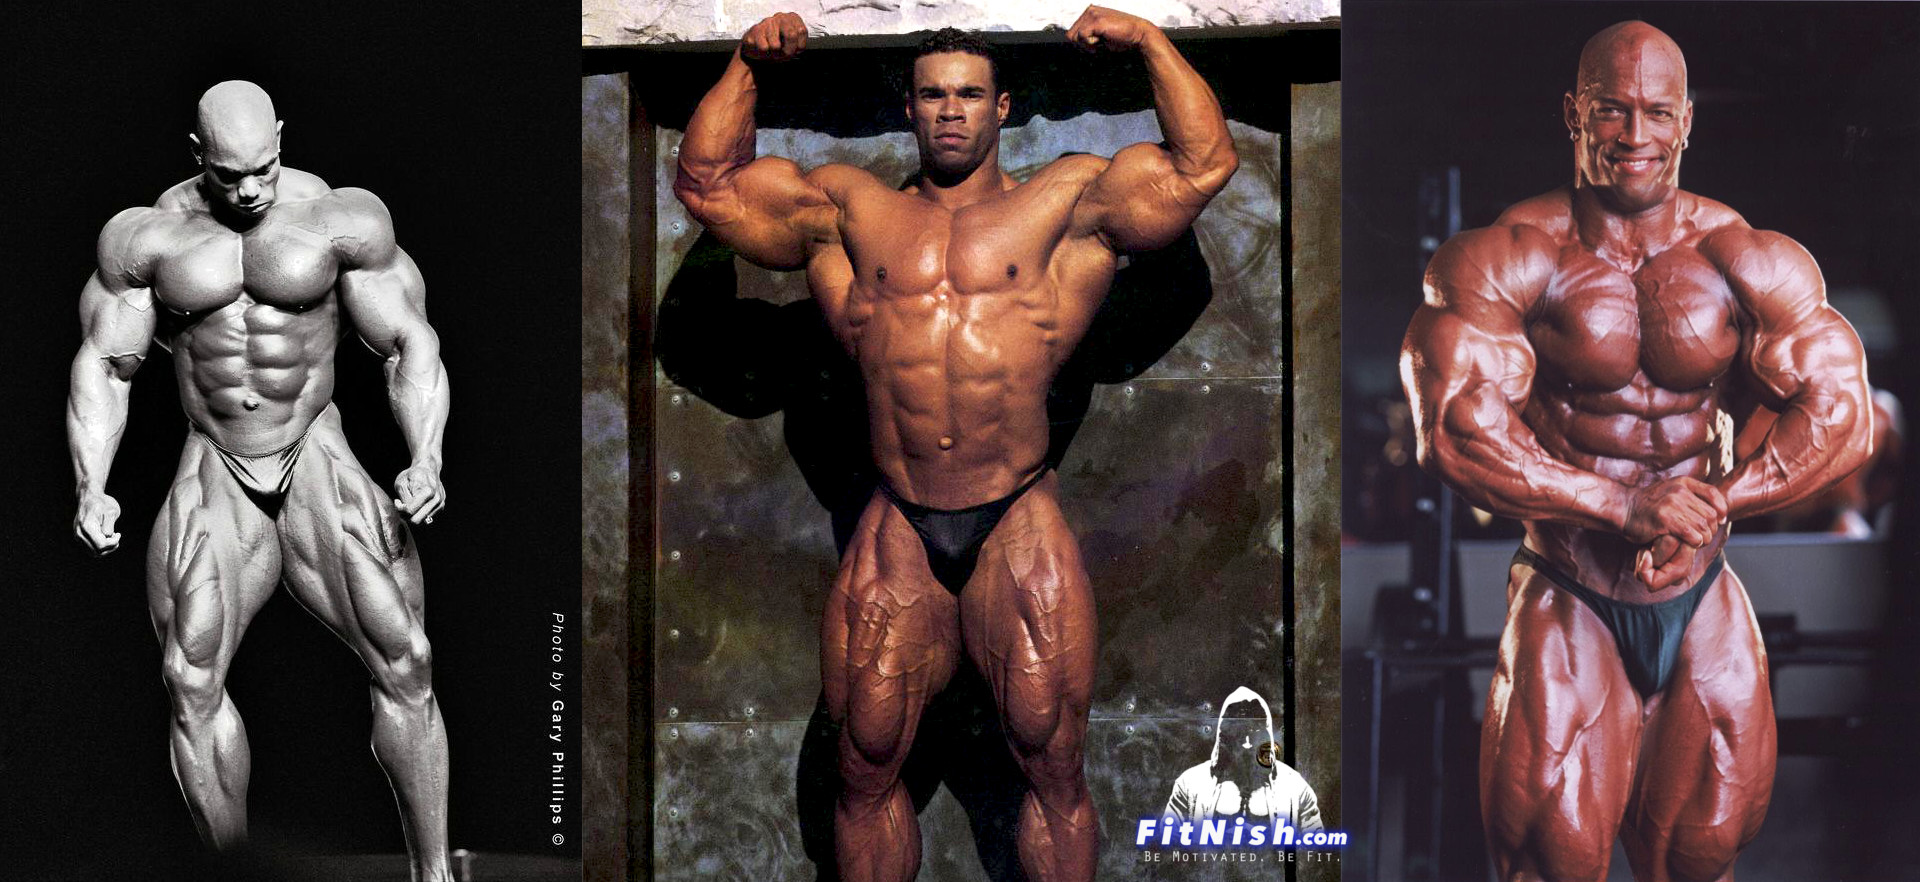 Flex Wheeler Interview With Iron Cinema: "Shawn Ray Is Wrong About Kevin Levrone"